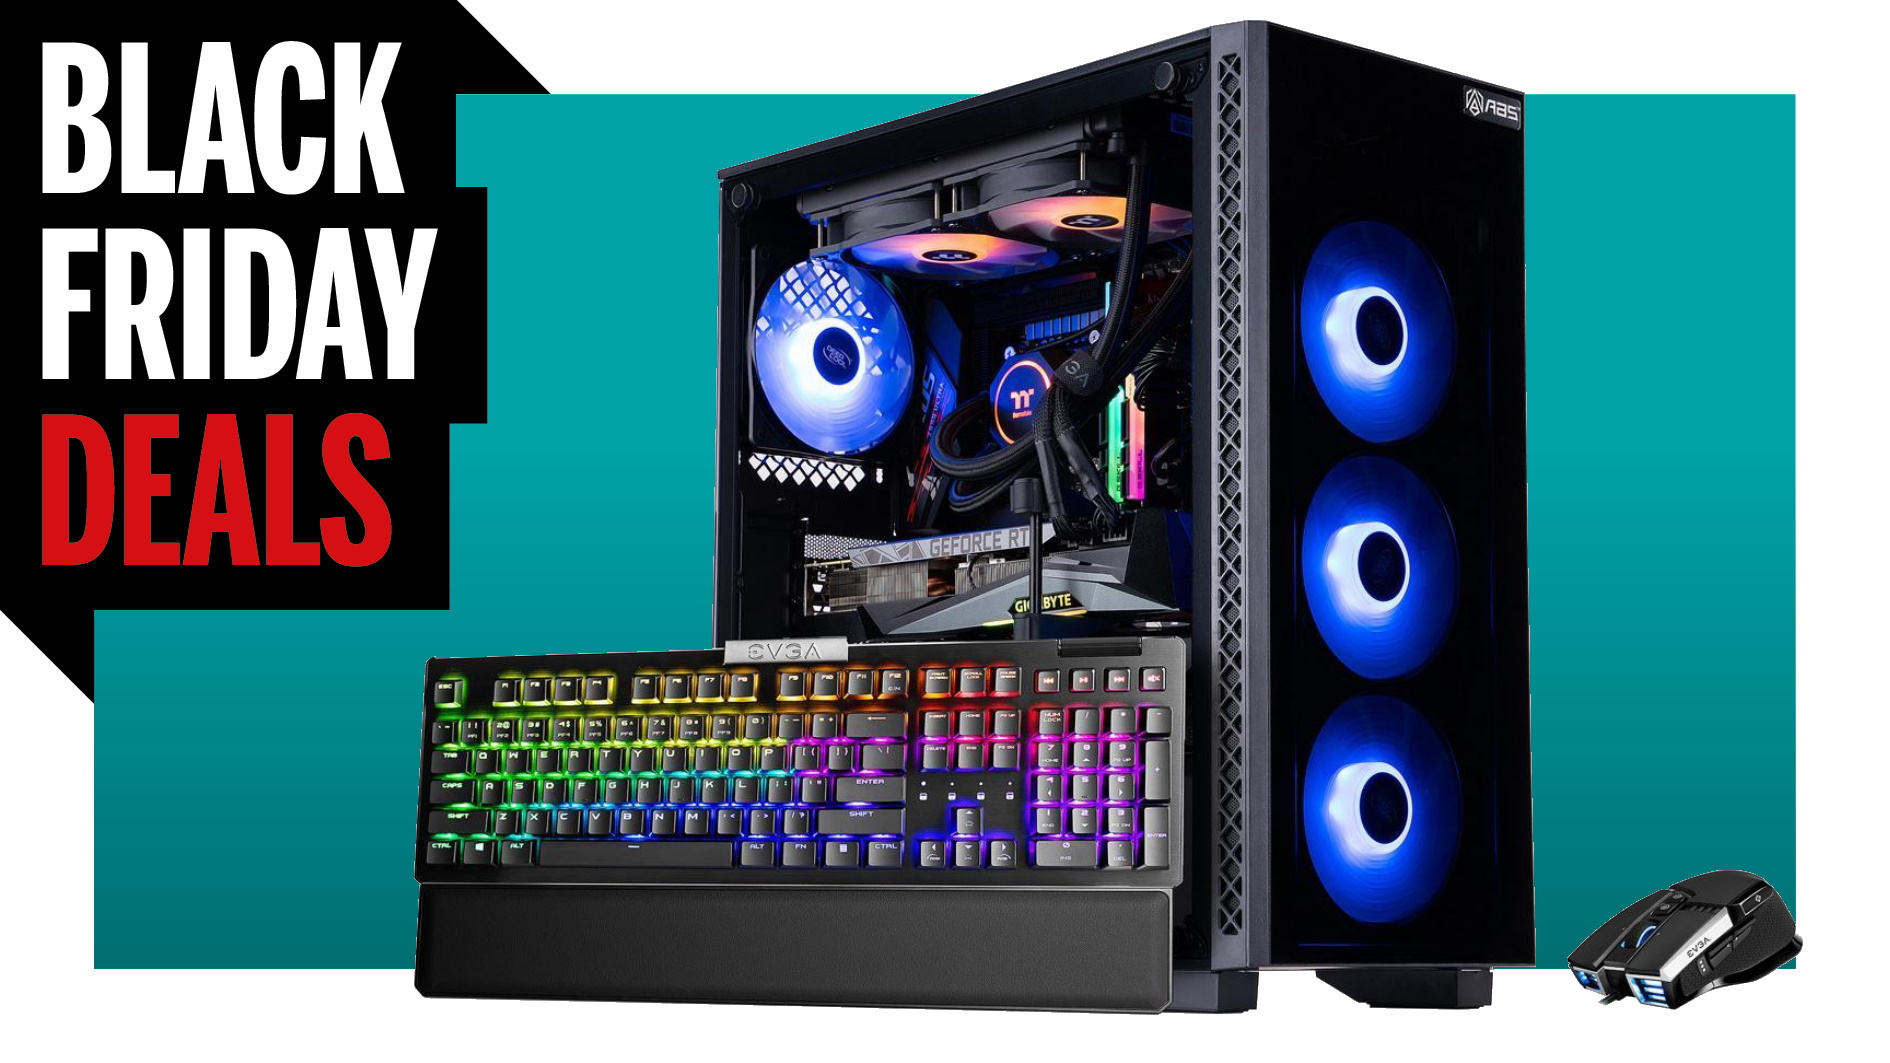 Don't Pay More Than This For A Black Friday Gaming PC Deal thumbnail